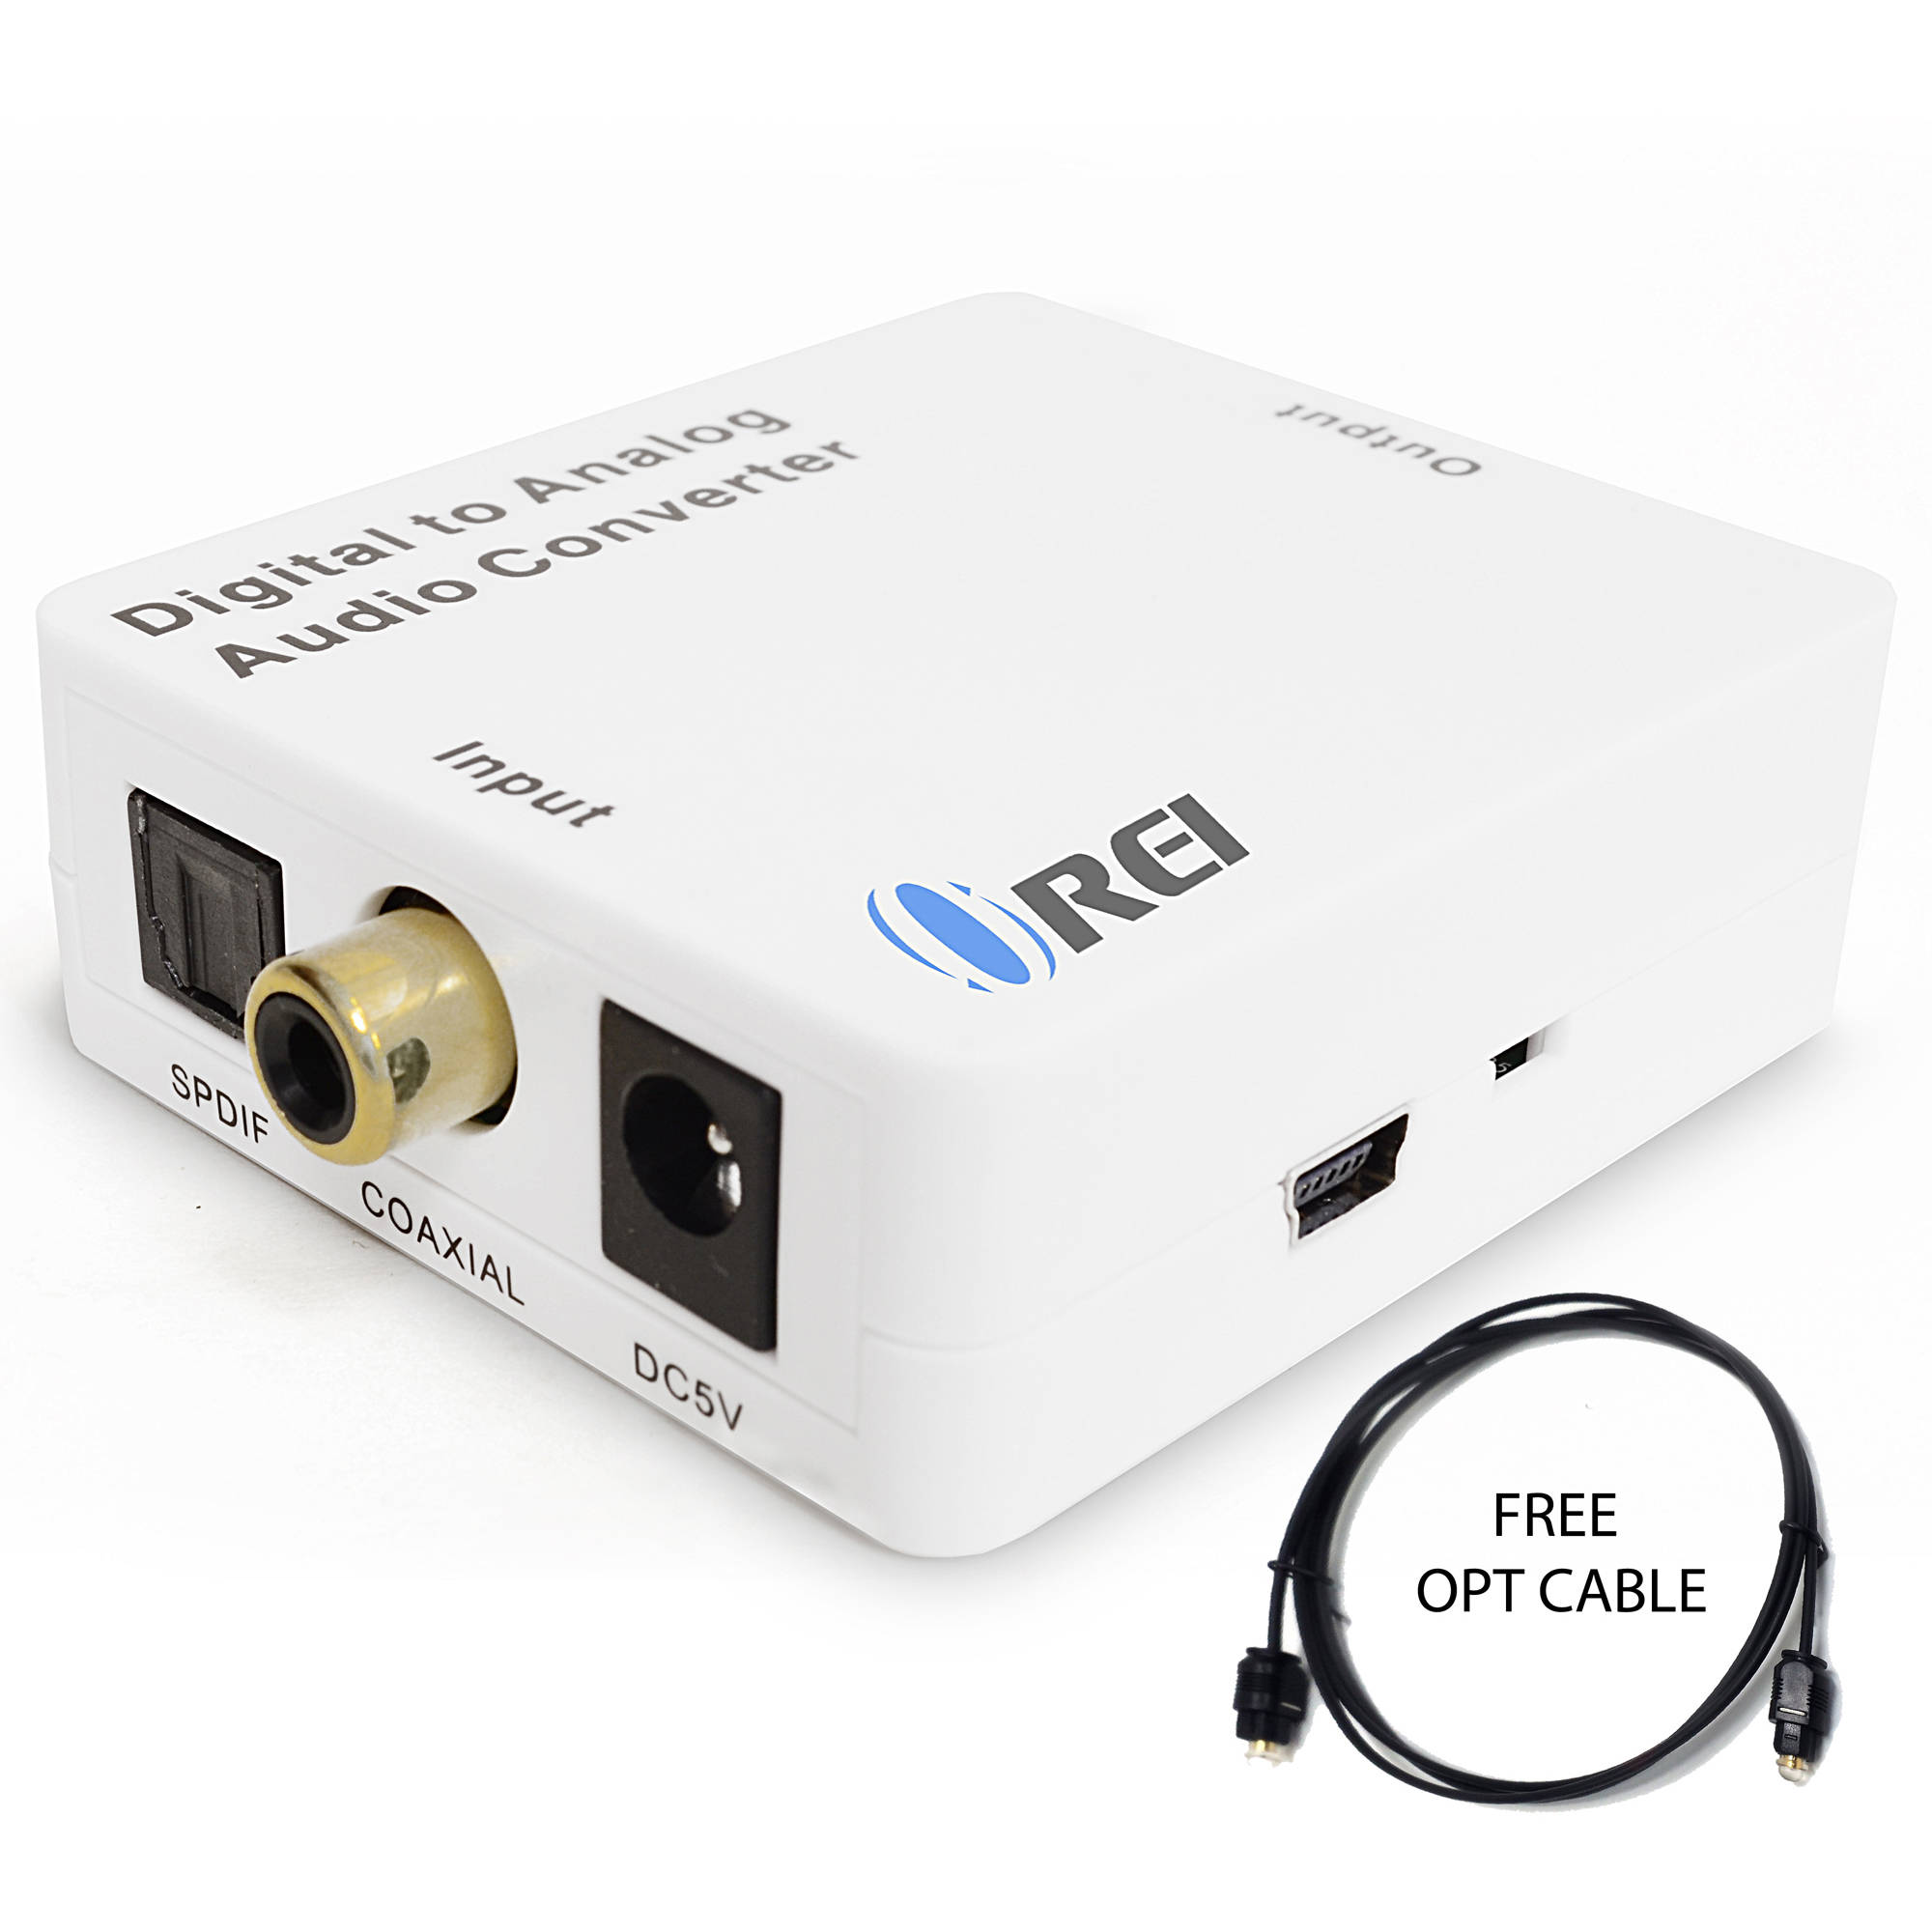 Orei DA21 Optical SPDIF/Coaxial Digital to RCA L/R Analog Audio Converter with 3.5mm Jack Support Headphone/Speaker Outputs - image 1 of 2